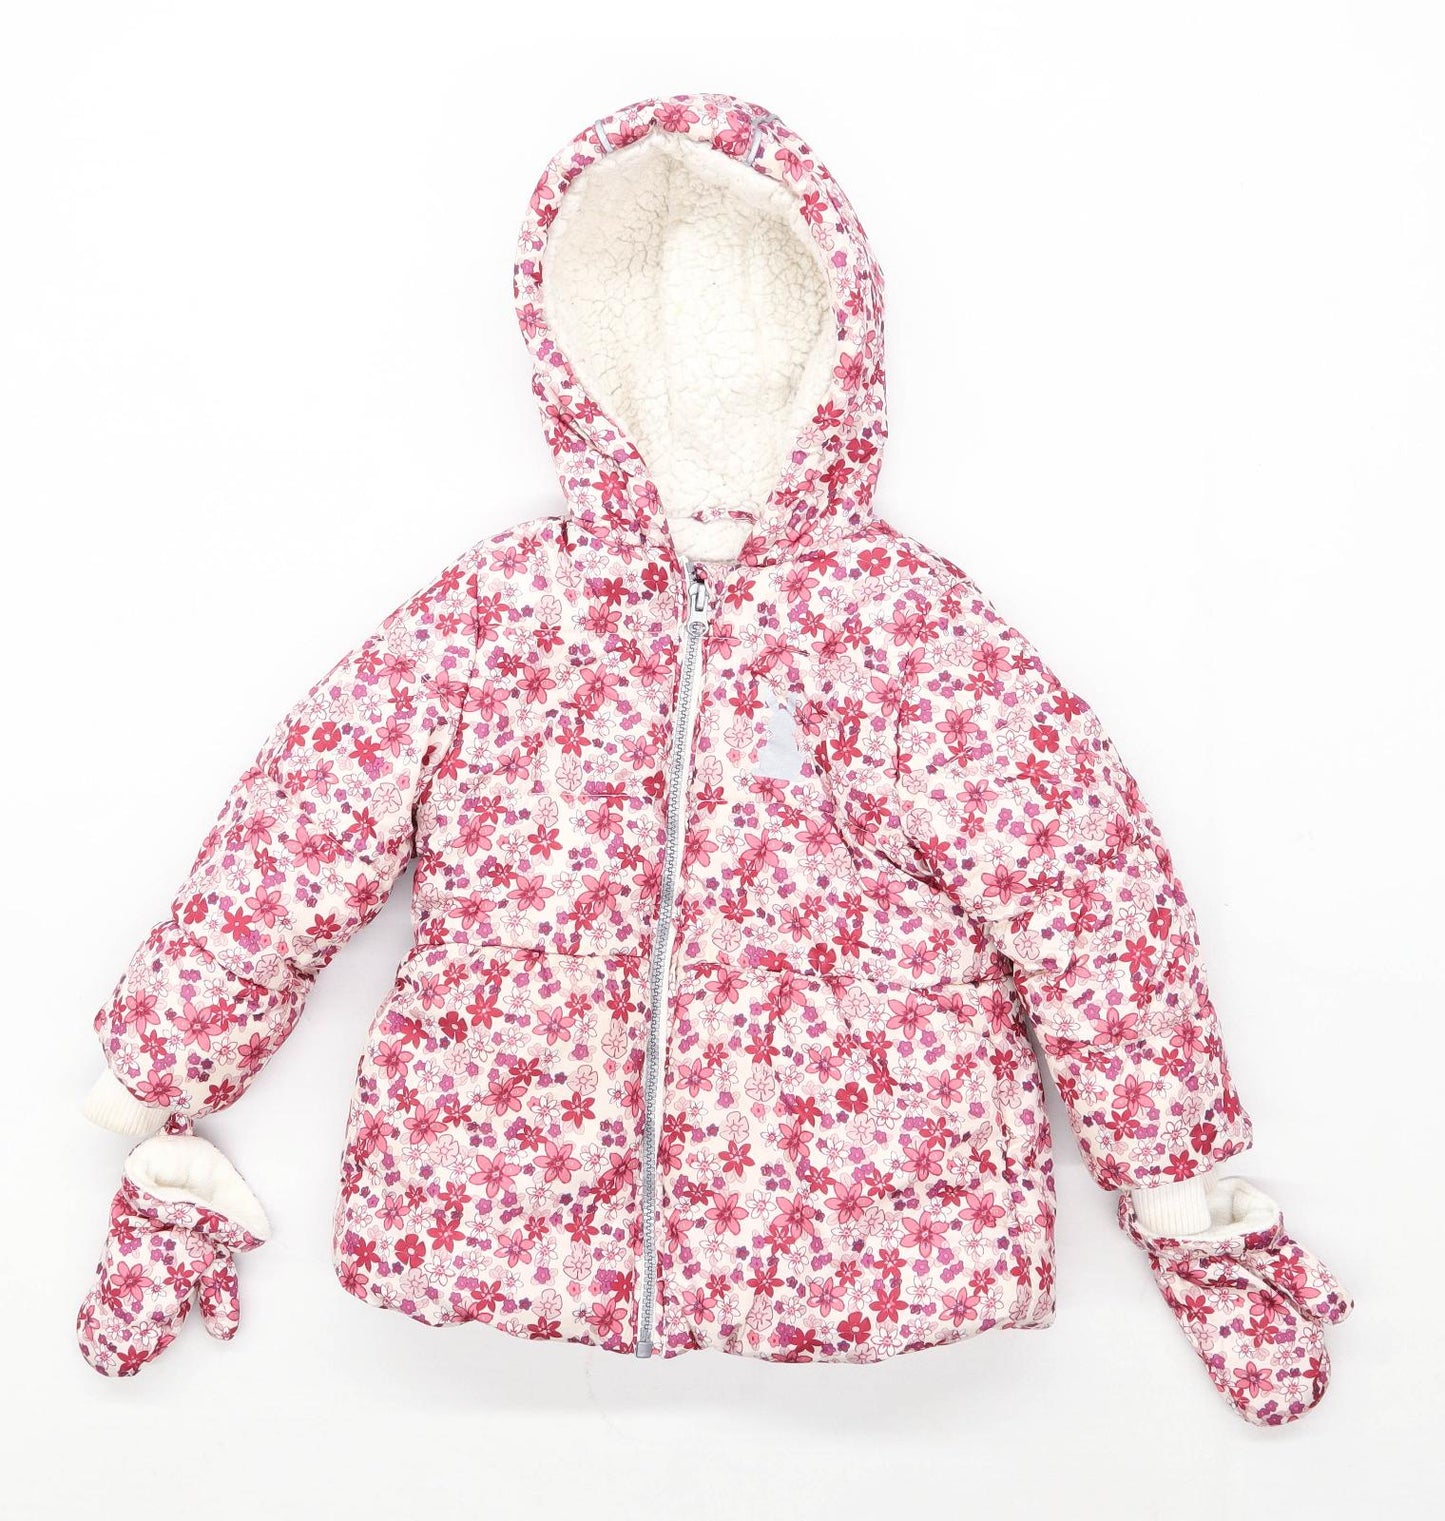 Nutmeg Girls Floral Pink Coat Age 2-3 Years